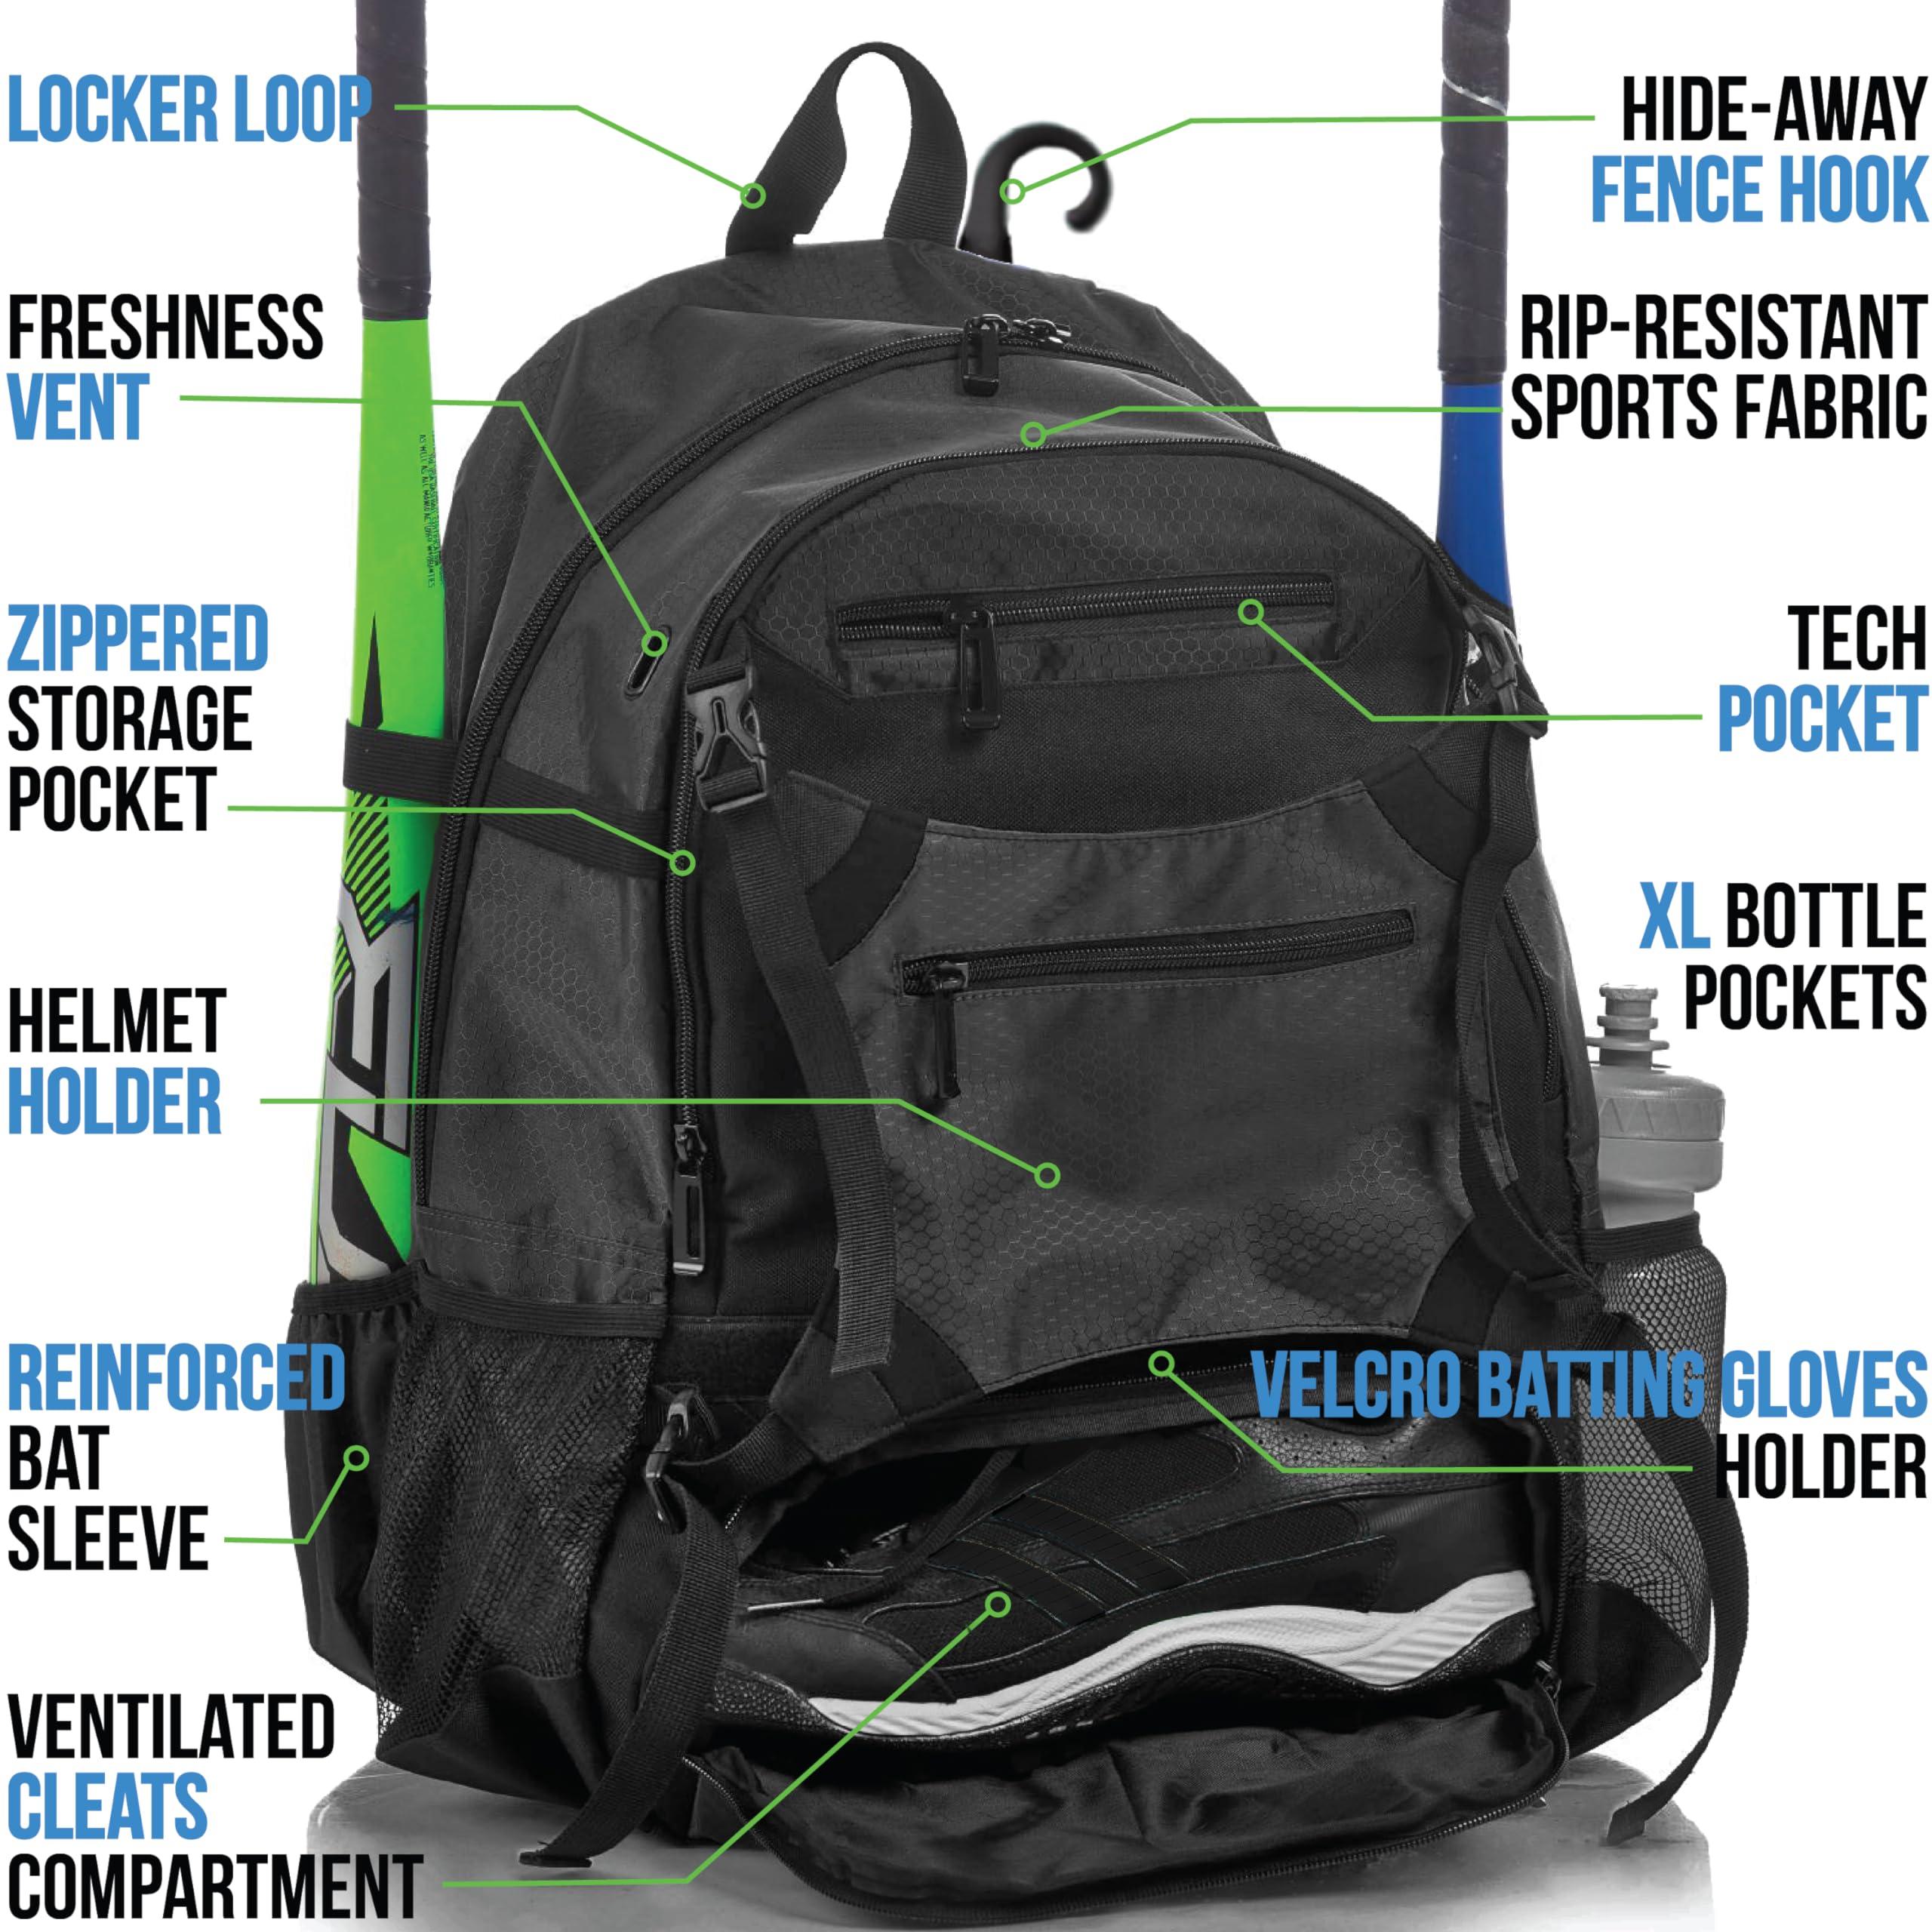 Athletico Advantage Baseball Bag - Baseball Backpack With External Helmet Holder for Baseball, T-Ball & Softball Equipment & Gear for Youth and Adults | Holds Bat, Helmet, Glove, Shoes  - Acceptable